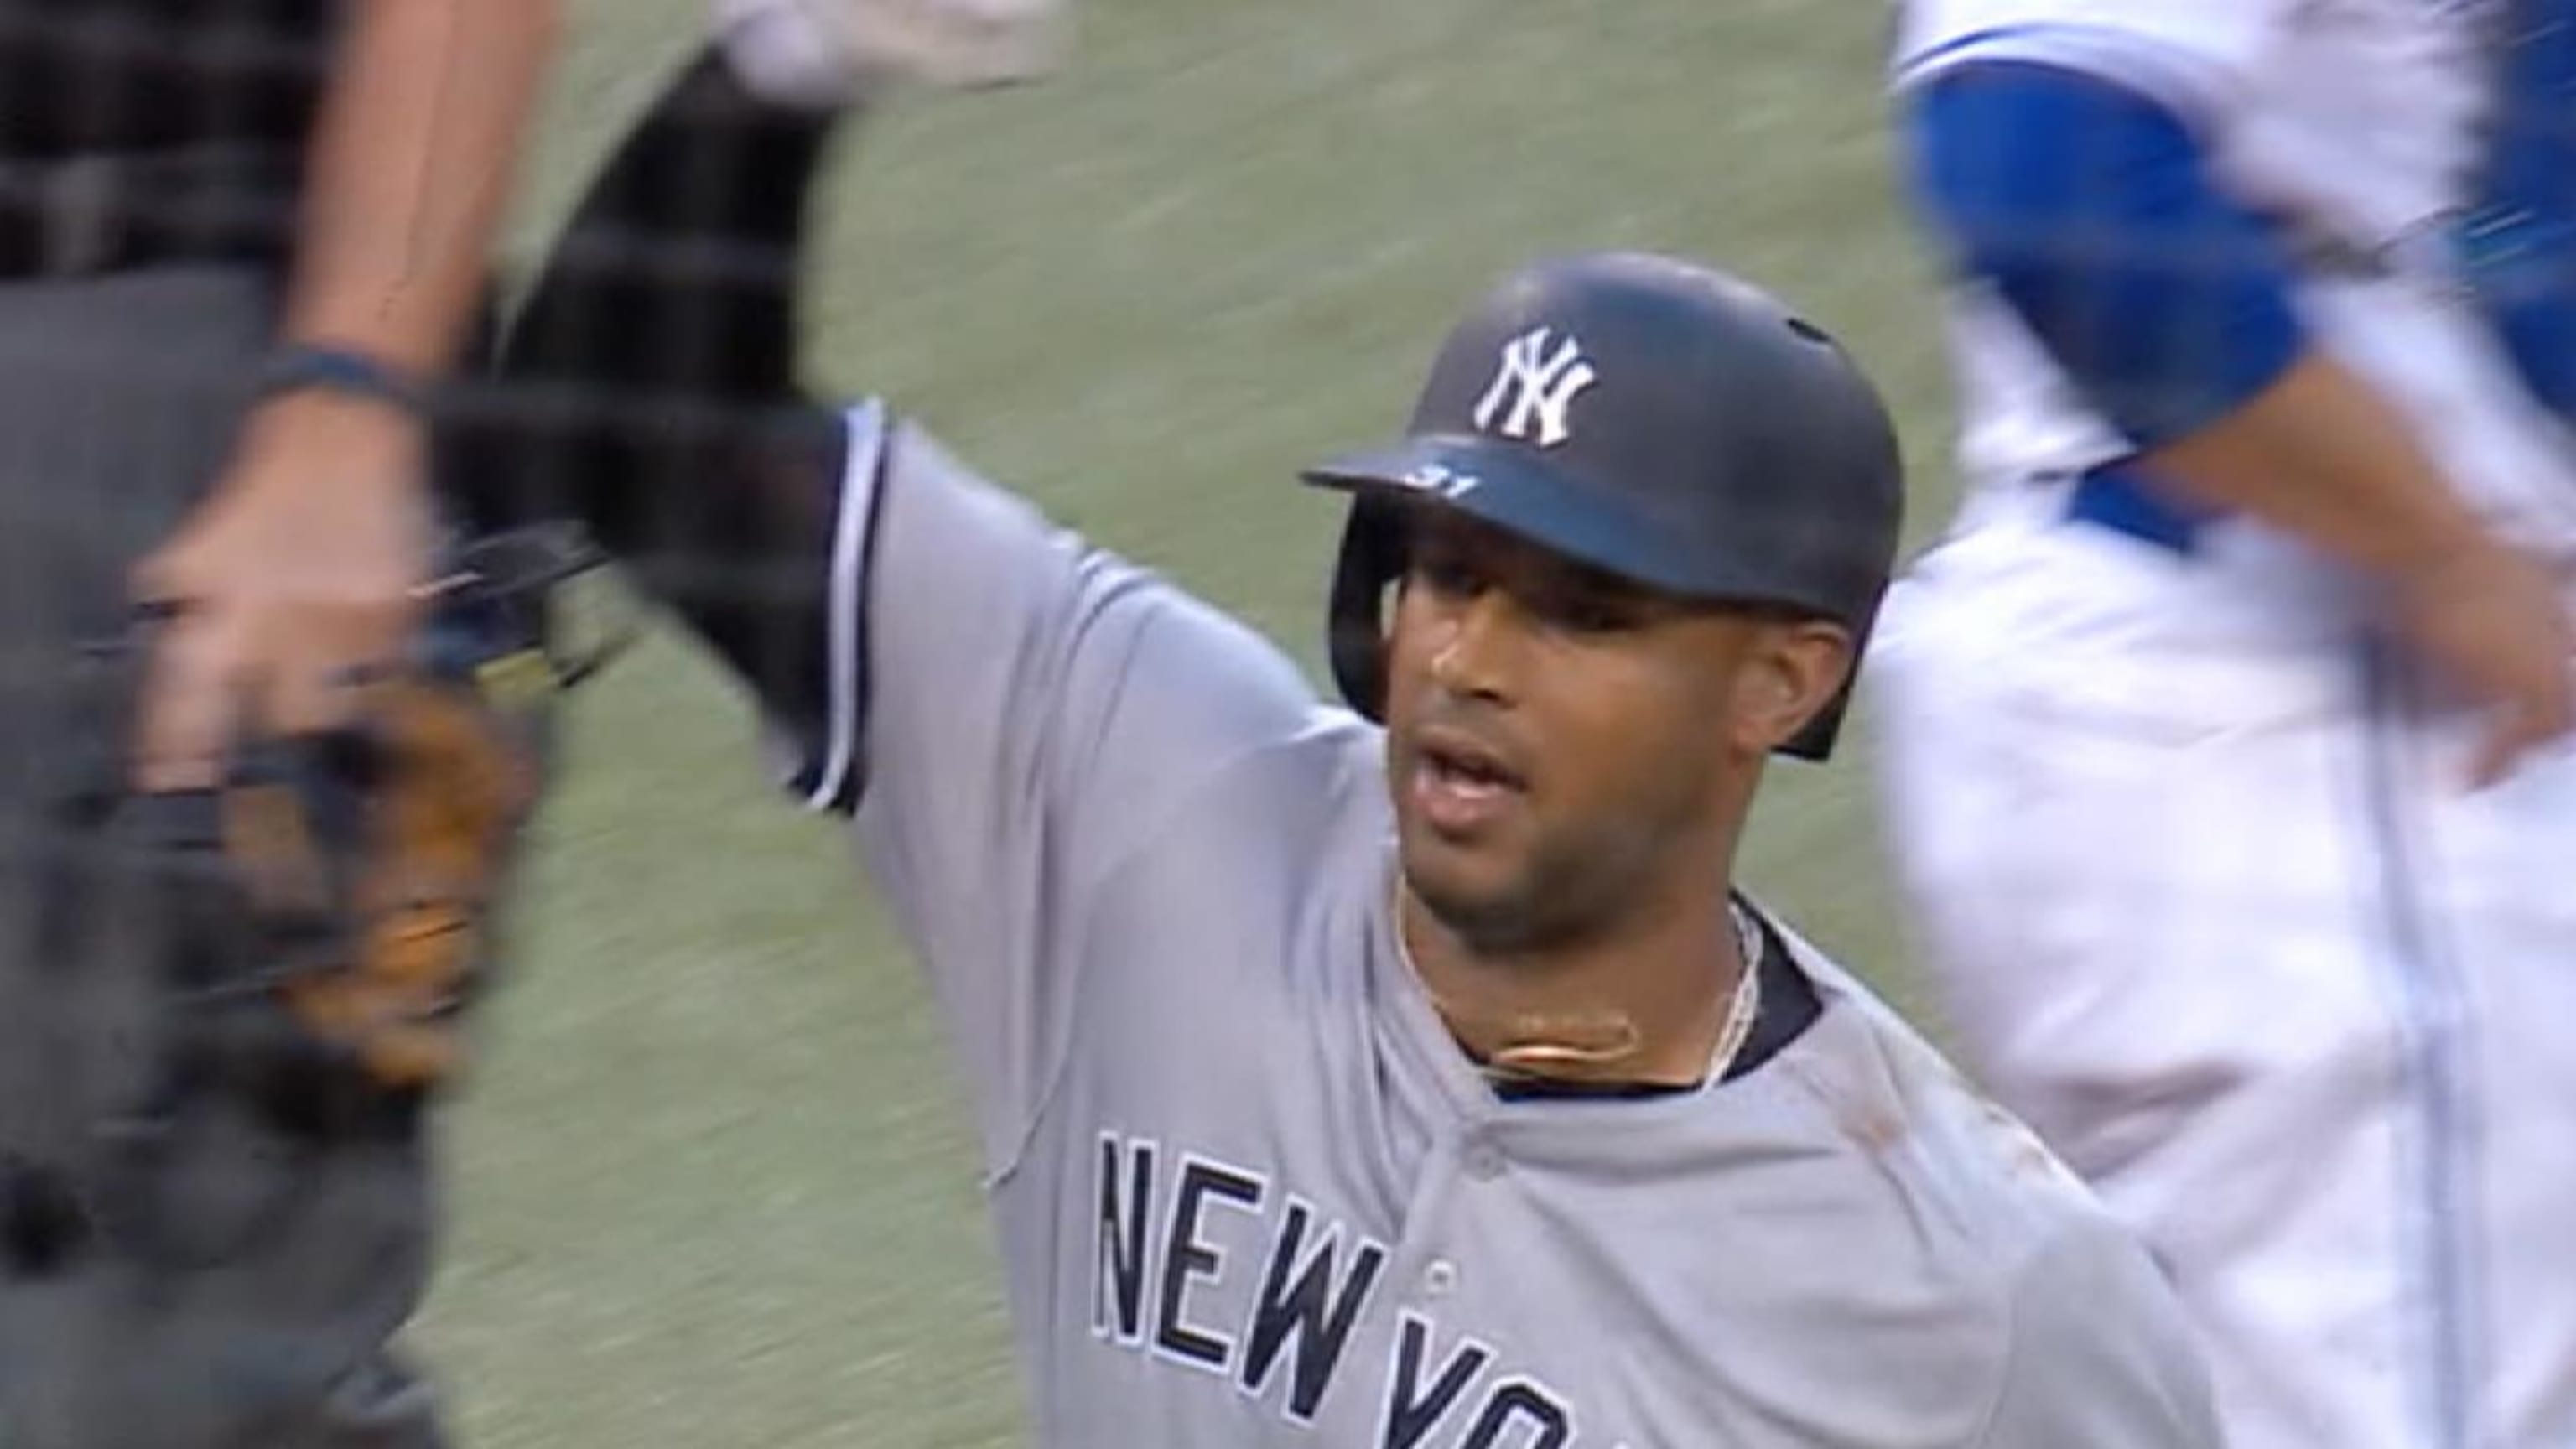 Yankees Secure Aaron Hicks With 7-Year, $70 Million Deal - The New